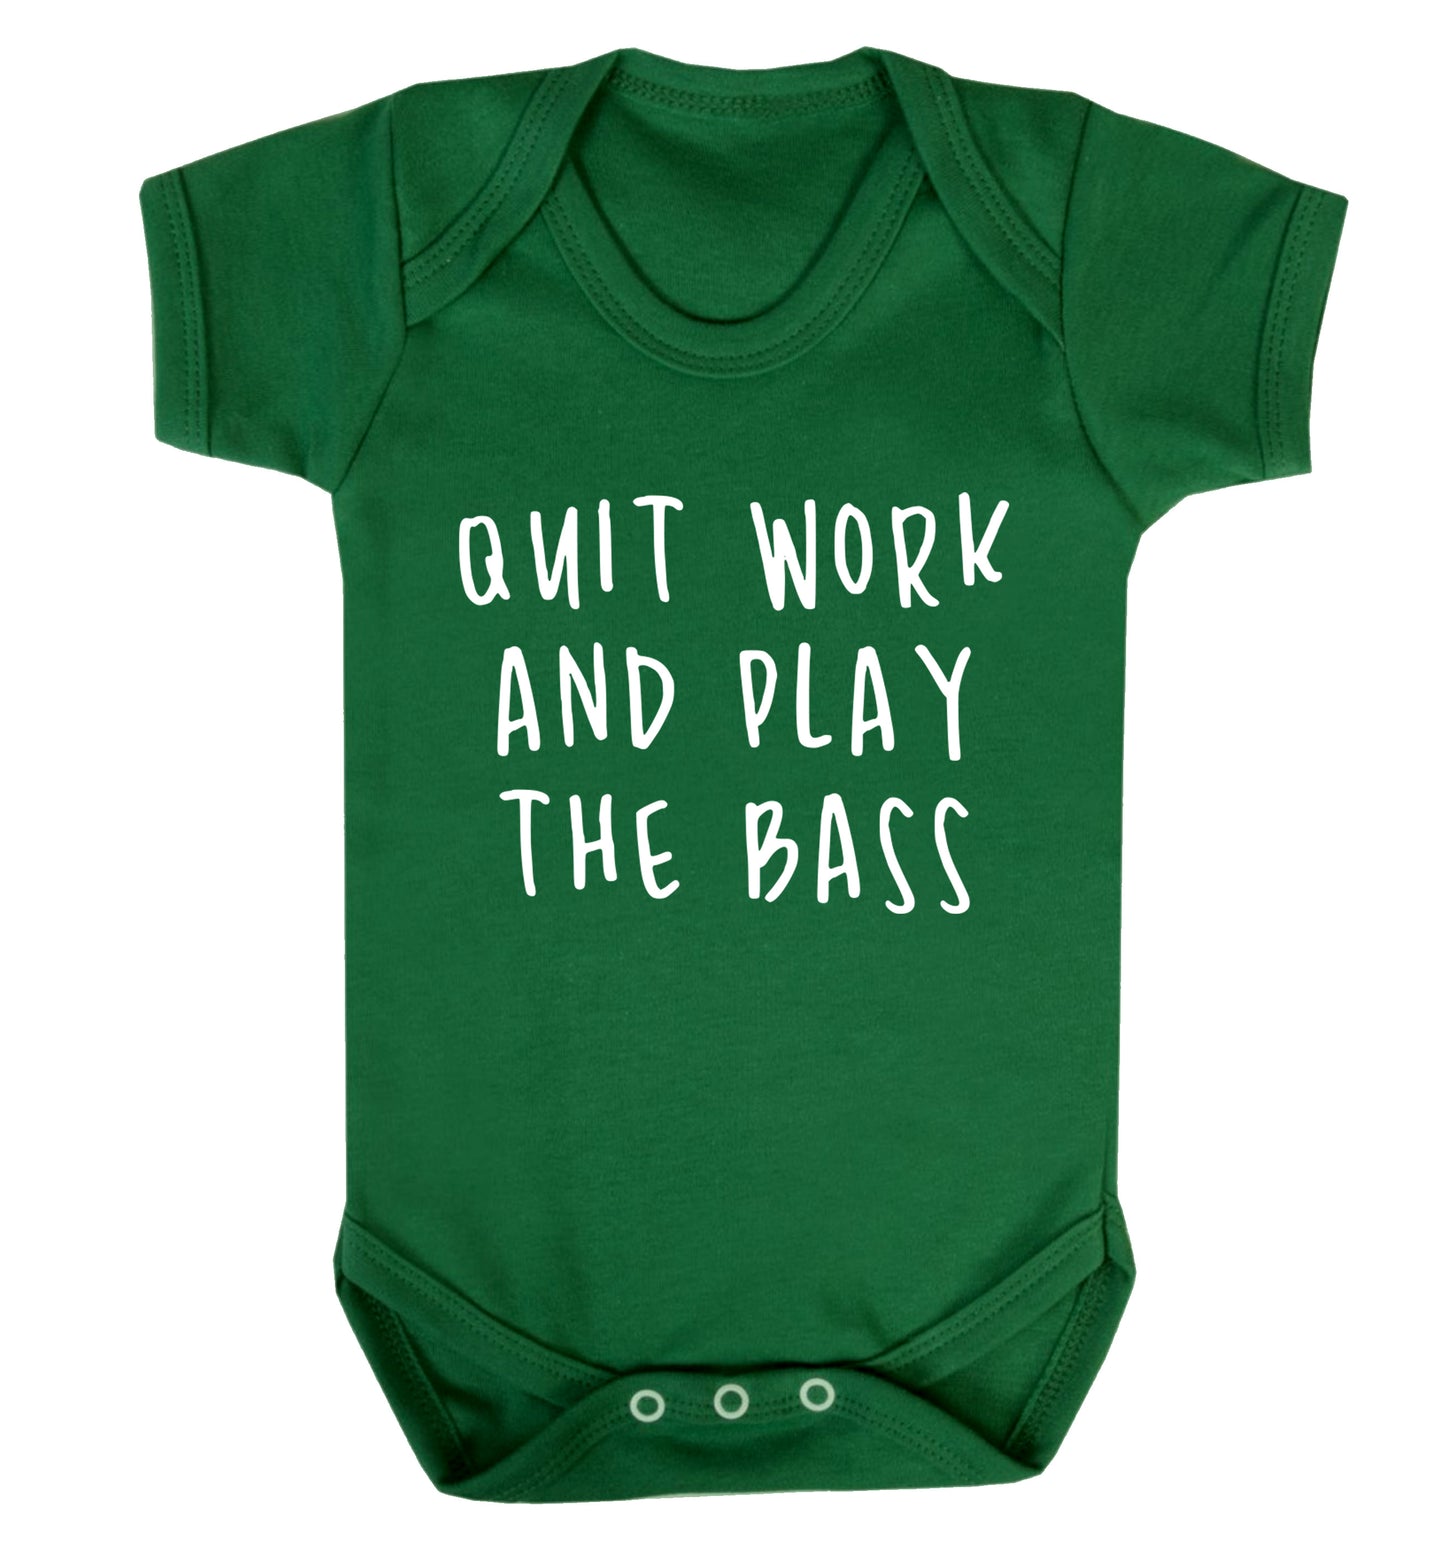 Quit work and play the bass Baby Vest green 18-24 months